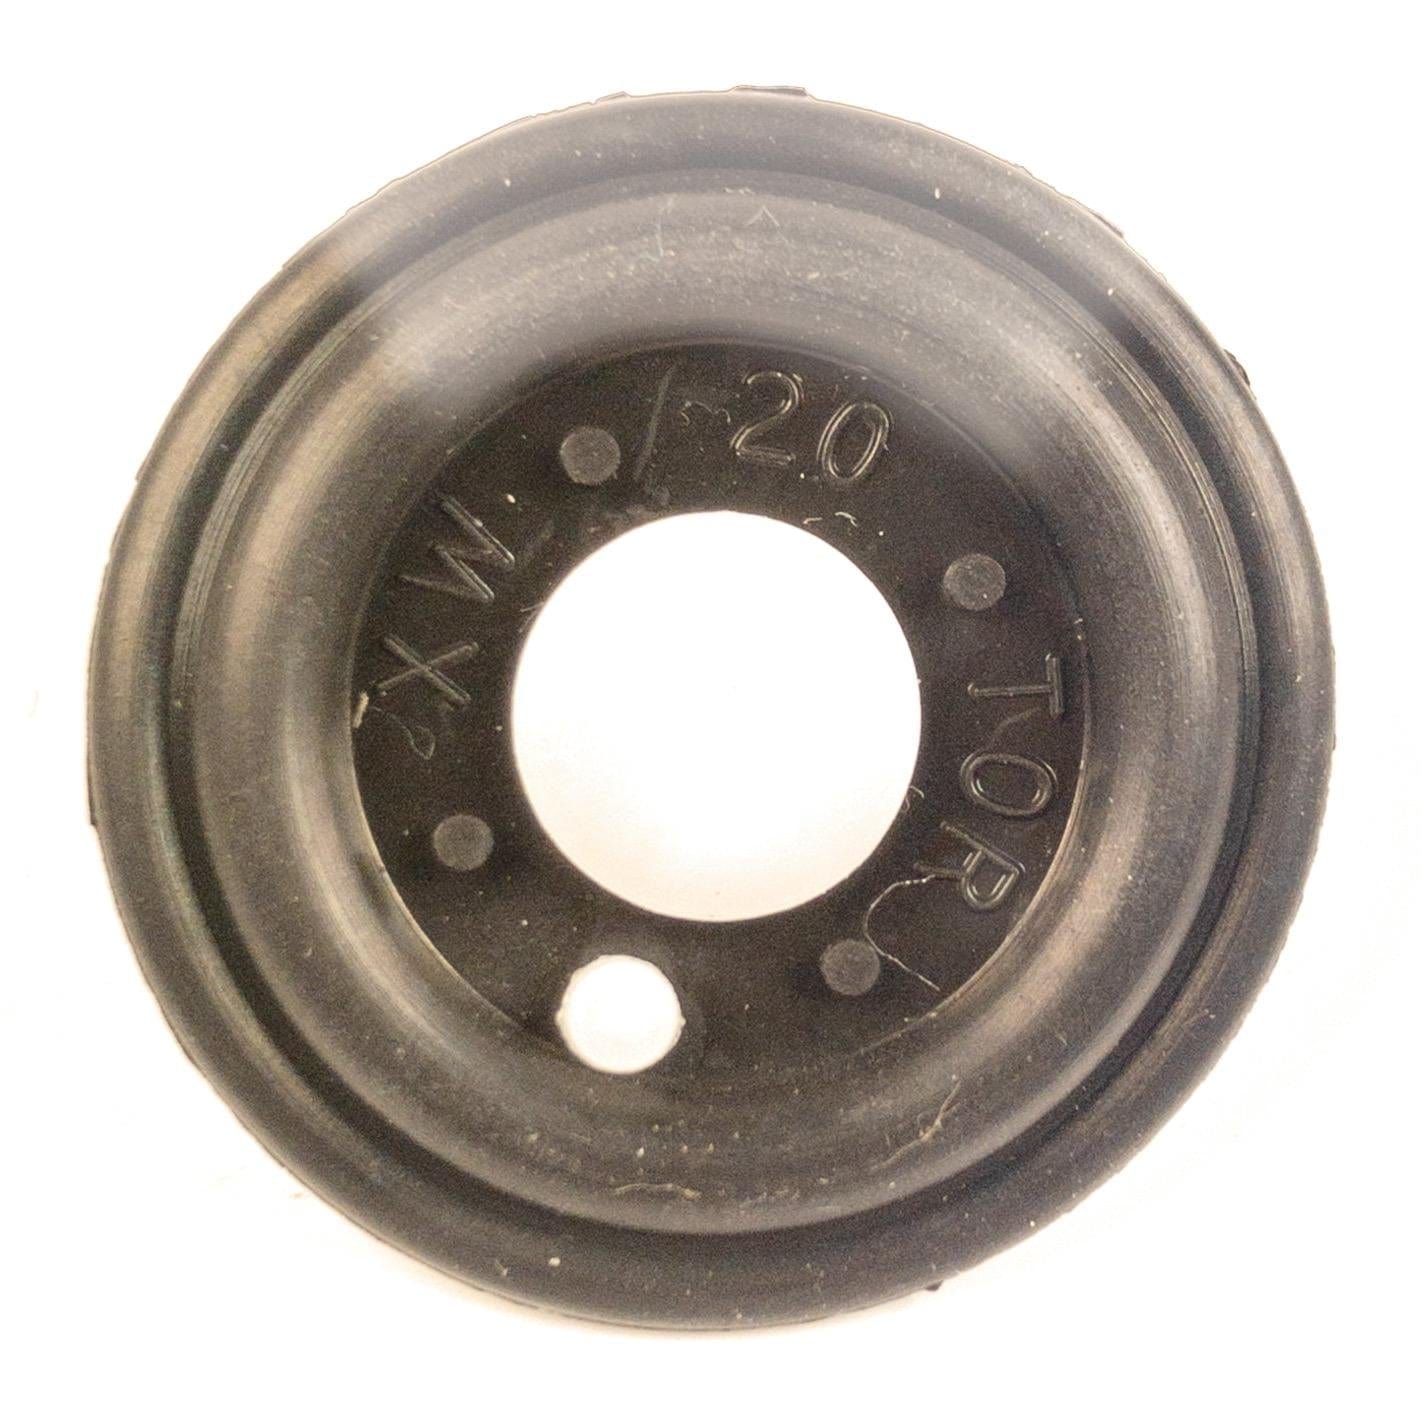 Torbeck Cistern Ball Valve Diaphragm Washer Replacement Inlet Valve Washers Torbeck 100105